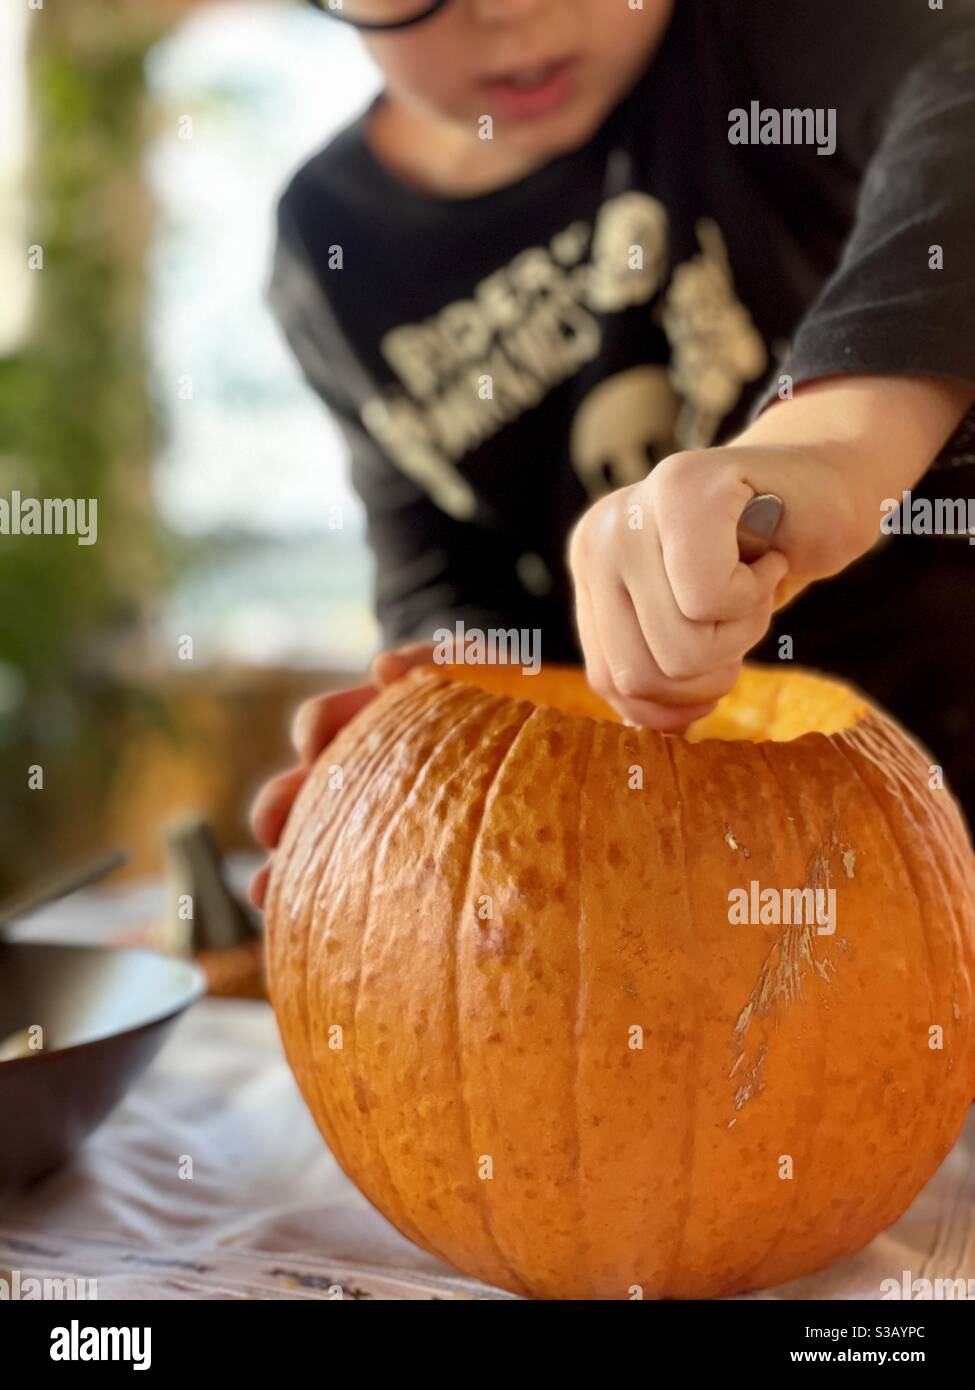 Boy scooping out the inside flesh of a pumpkin in preparation for Halloween Stock Photo